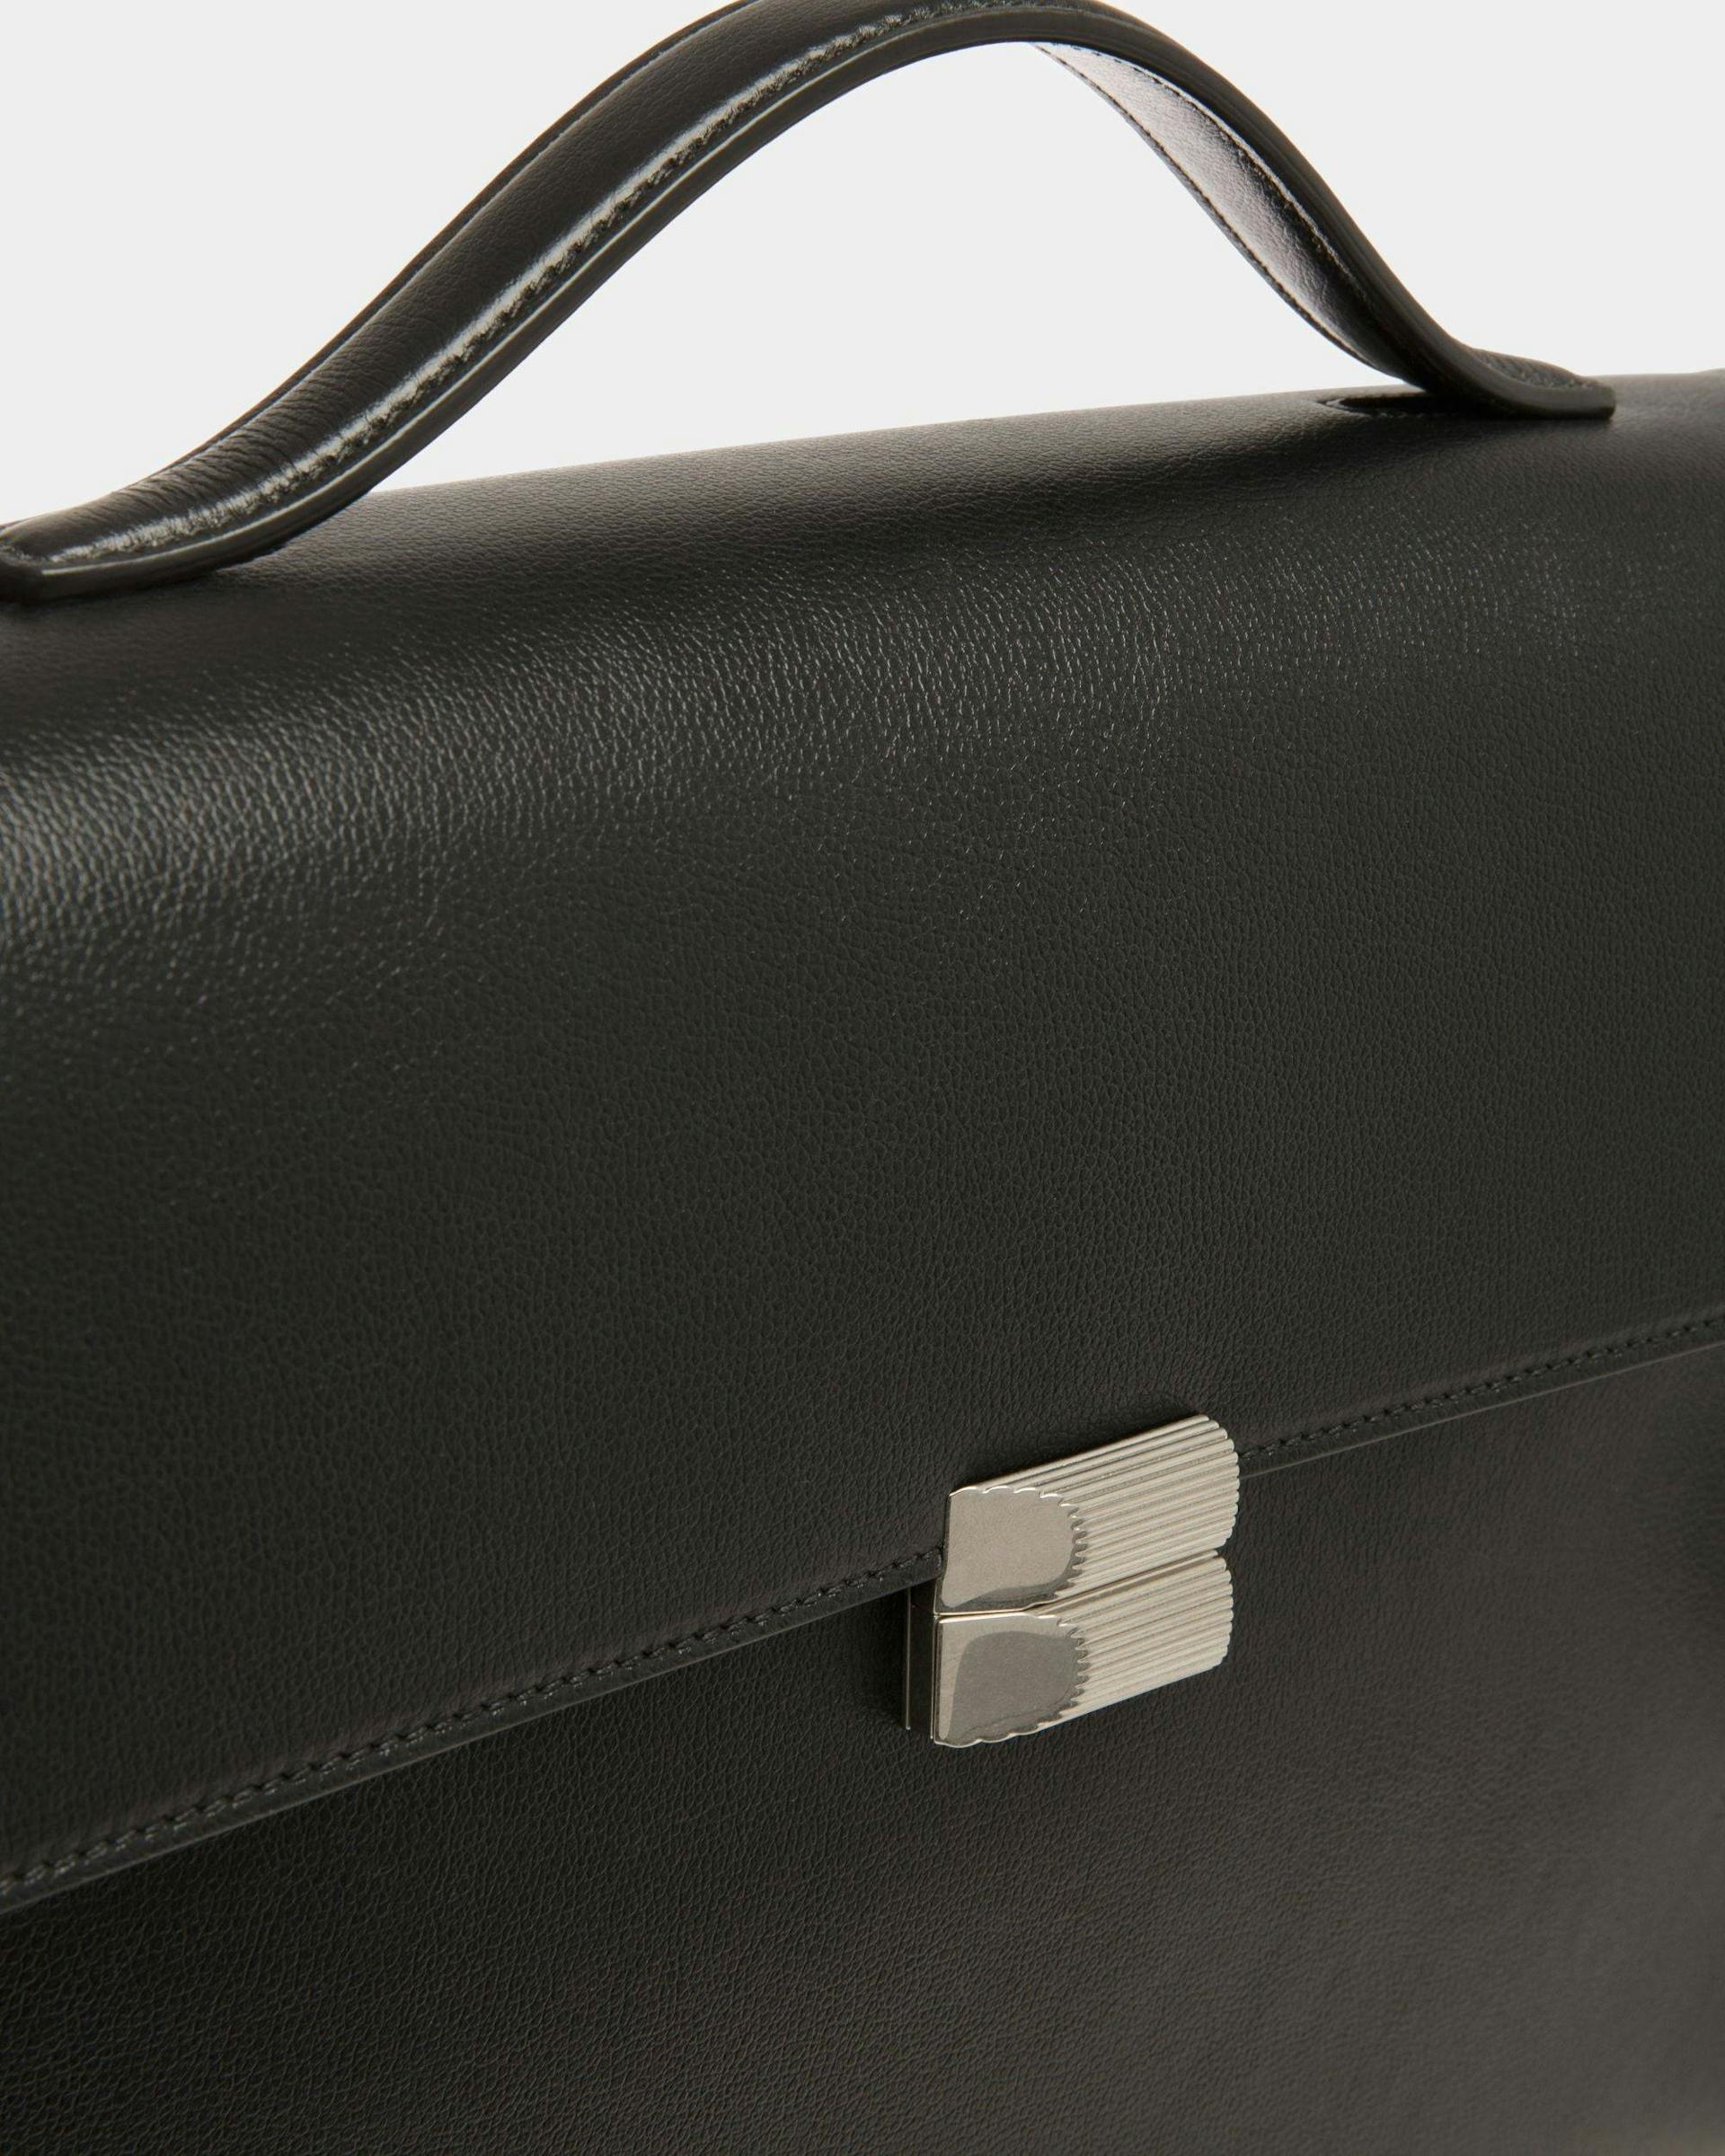 Men's Banque Business Bag In Black Leather | Bally | Still Life Detail